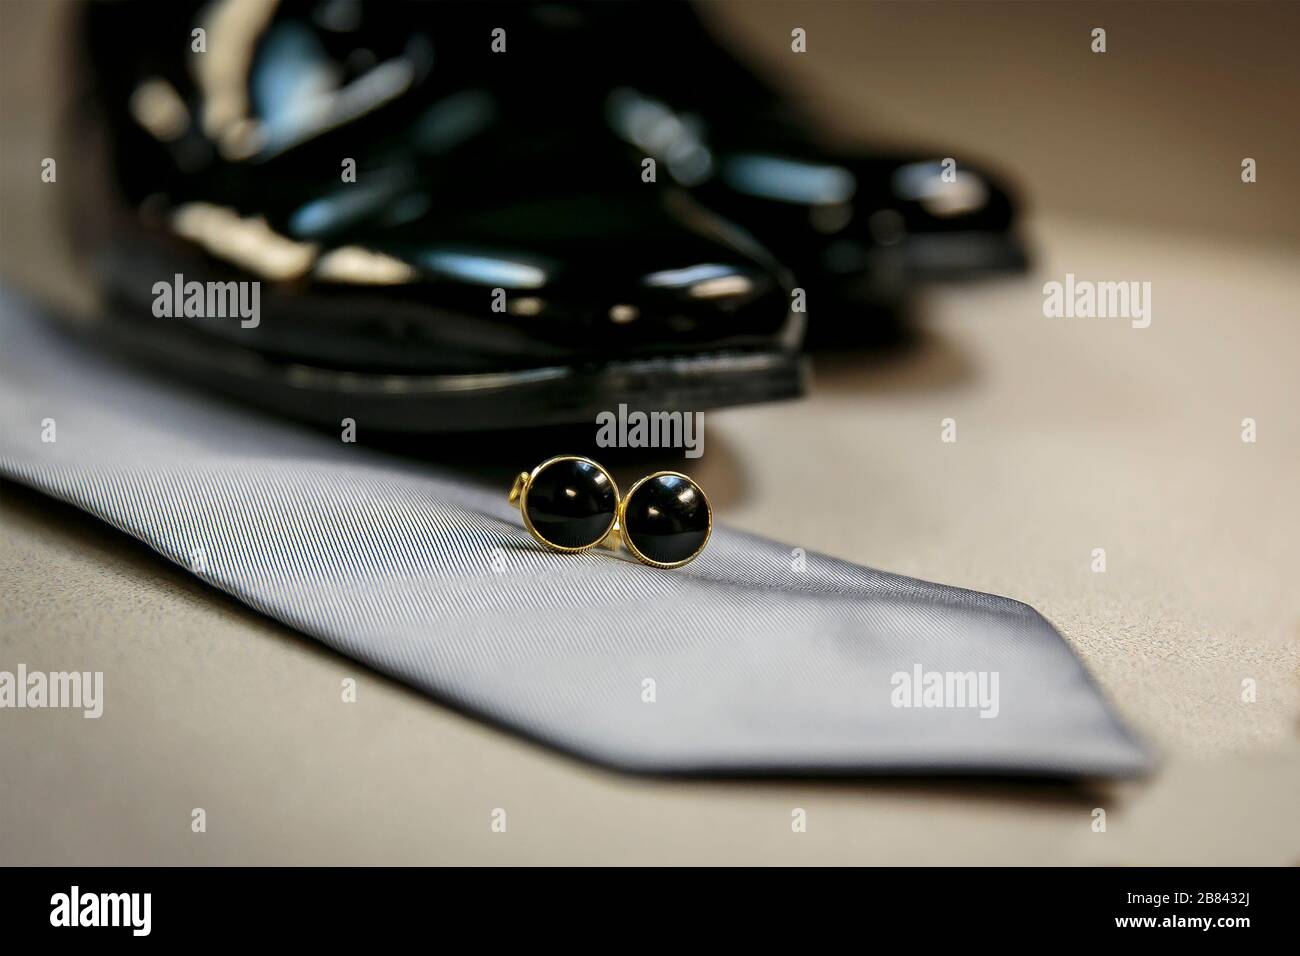 In preparation for a wedding, bridegroom shoes, tie and tie clasp on a table Stock Photo